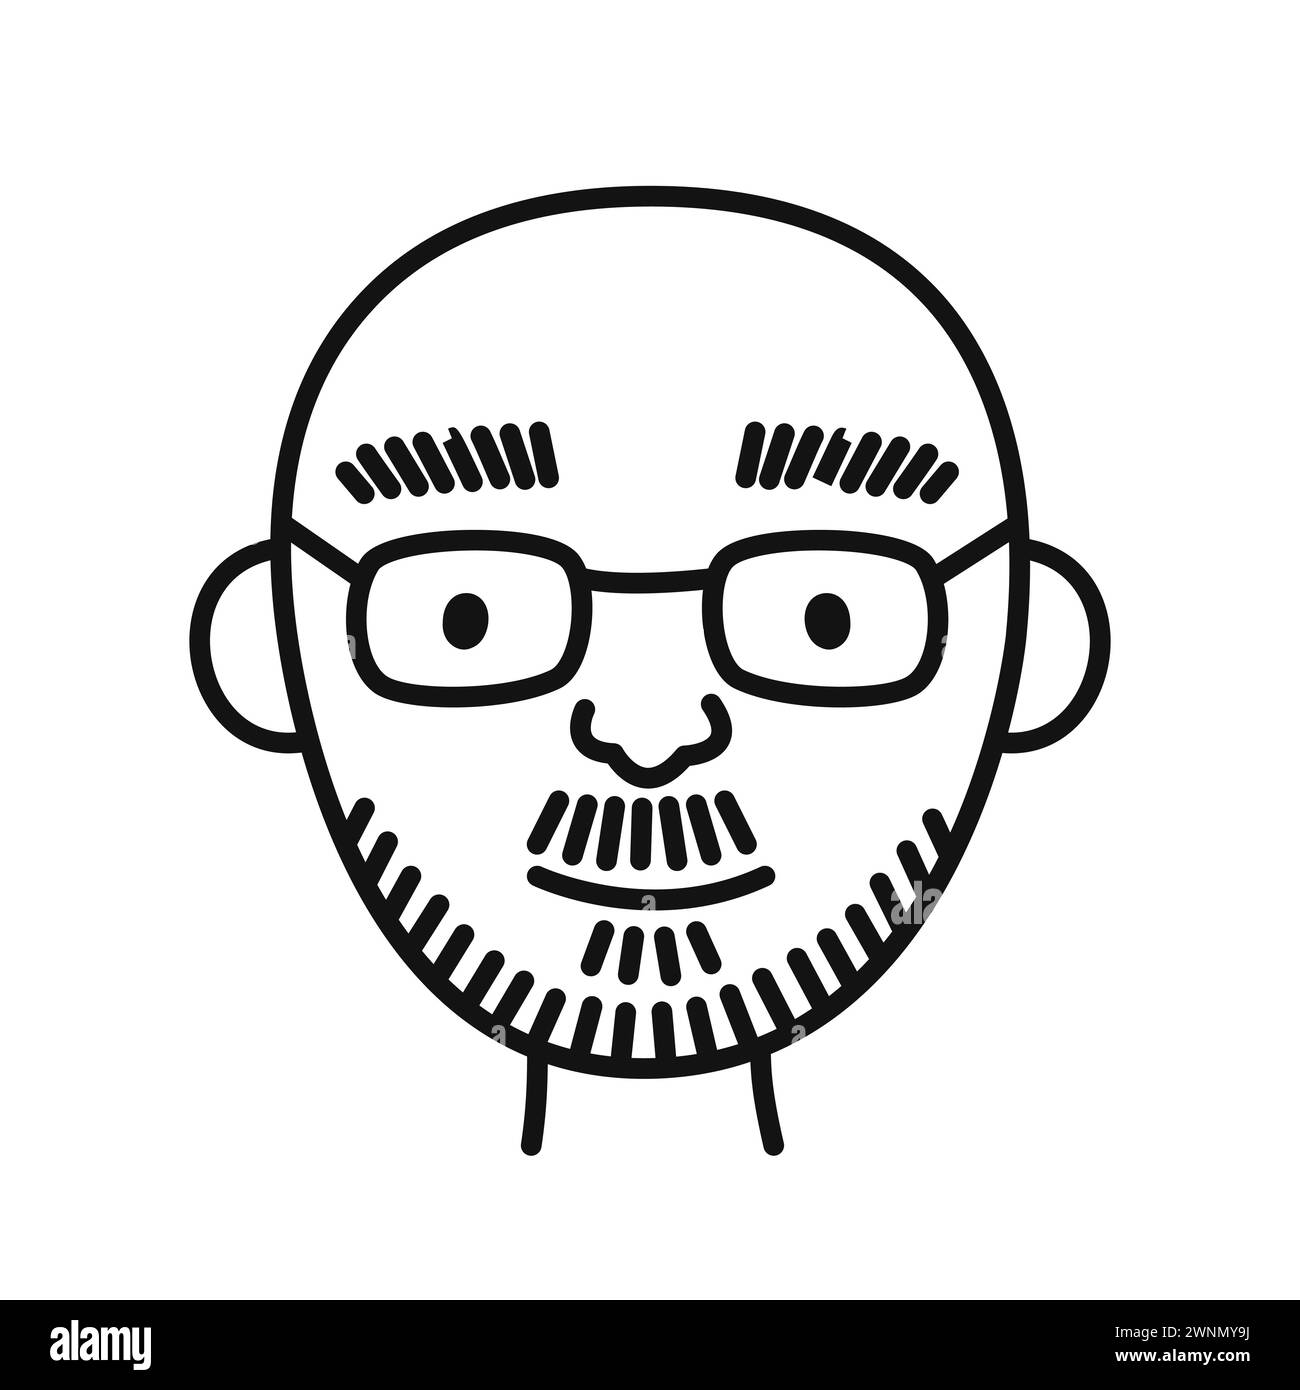 The face of a man with beard and glasses. Hand drawn portrait of person avatar in doodle style. Isolated vector illustration. Stock Vector